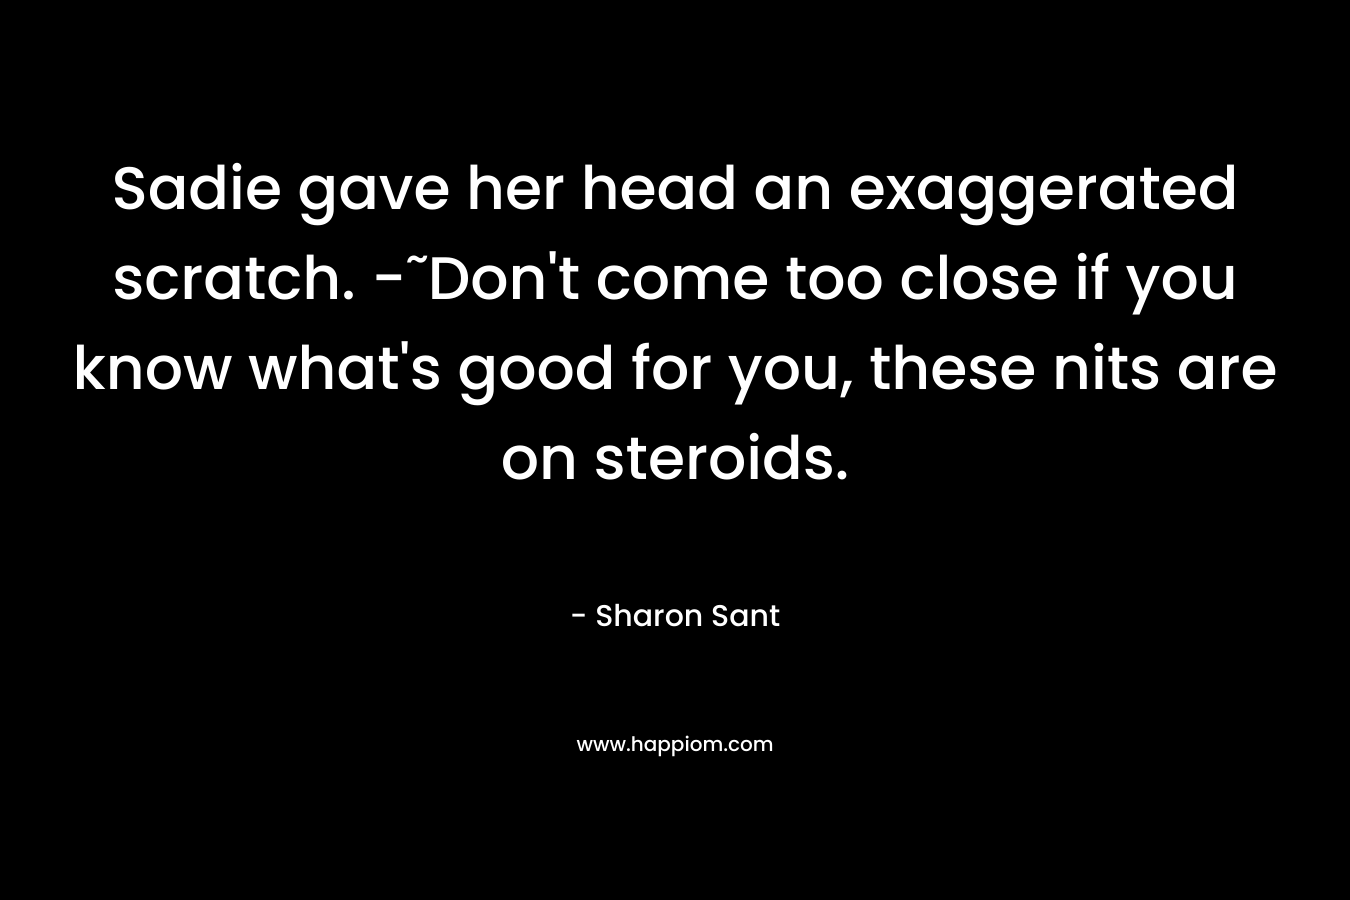 Sadie gave her head an exaggerated scratch. -˜Don’t come too close if you know what’s good for you, these nits are on steroids. – Sharon Sant